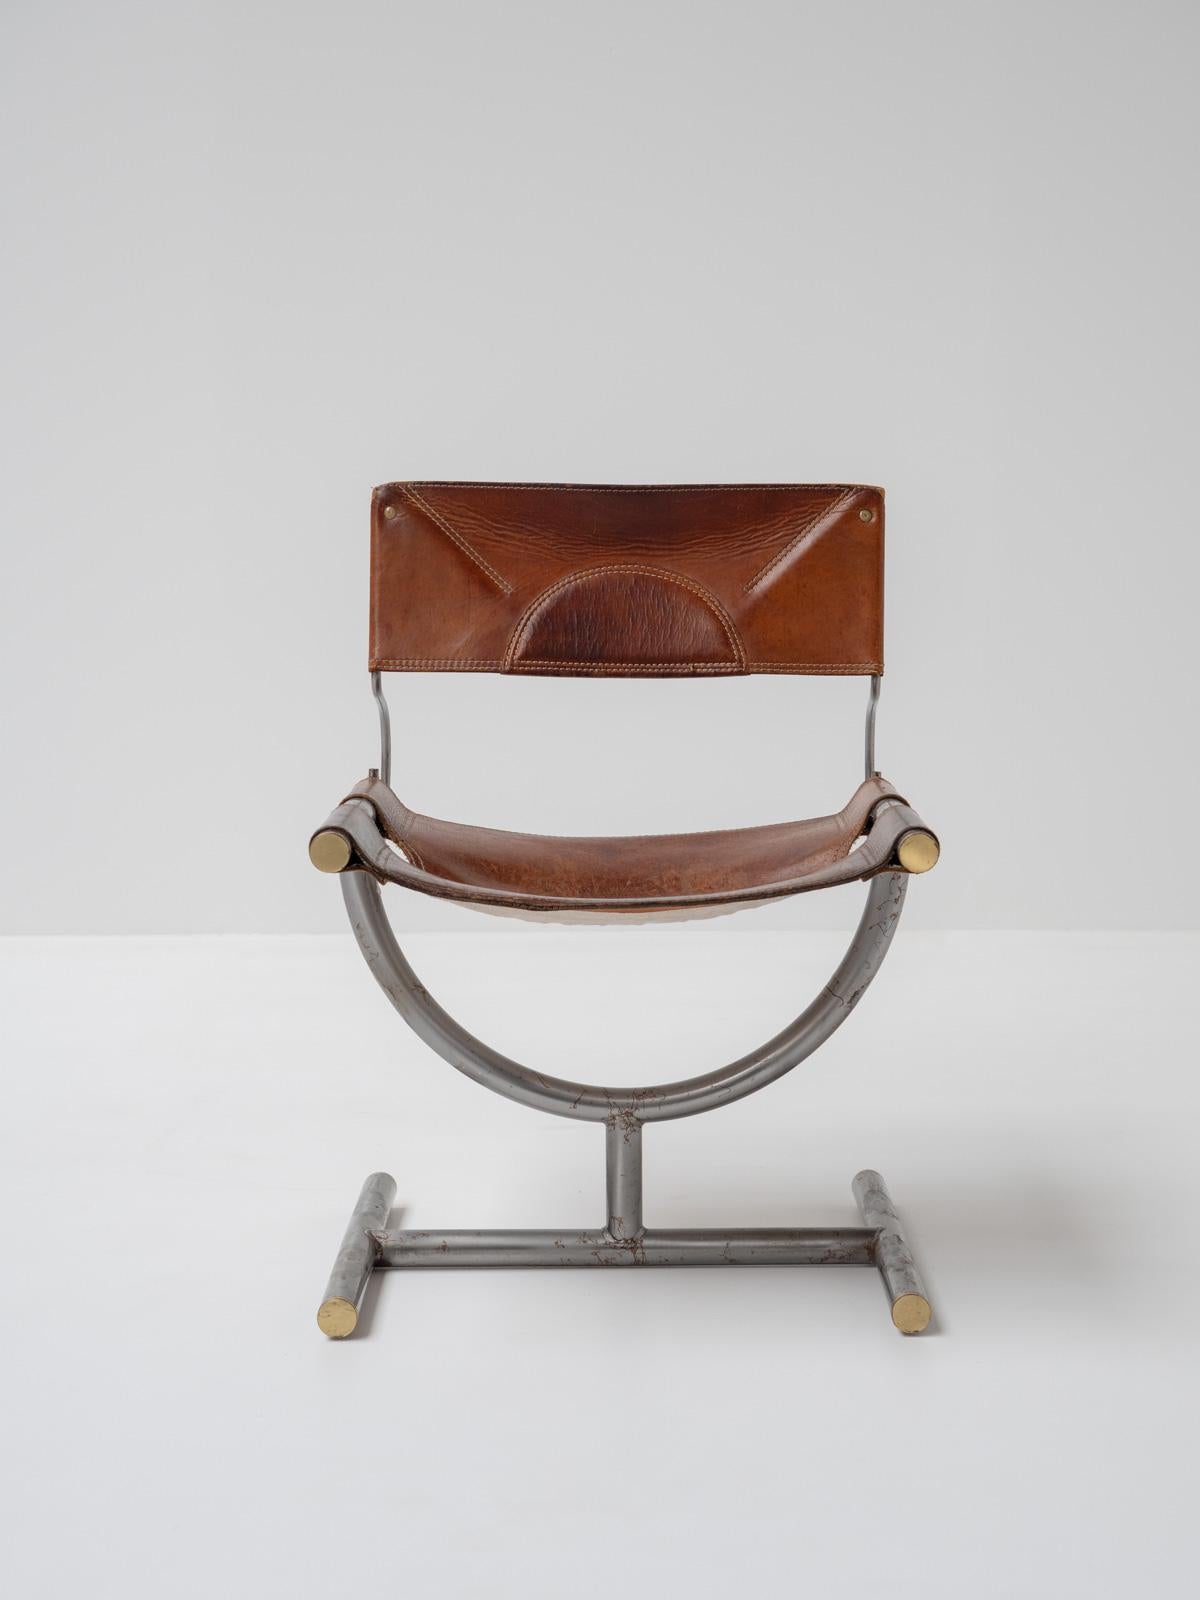 Afra & Tobia Scarpa ‘Benetton’ Chair, Italy, 1980s For Sale 3